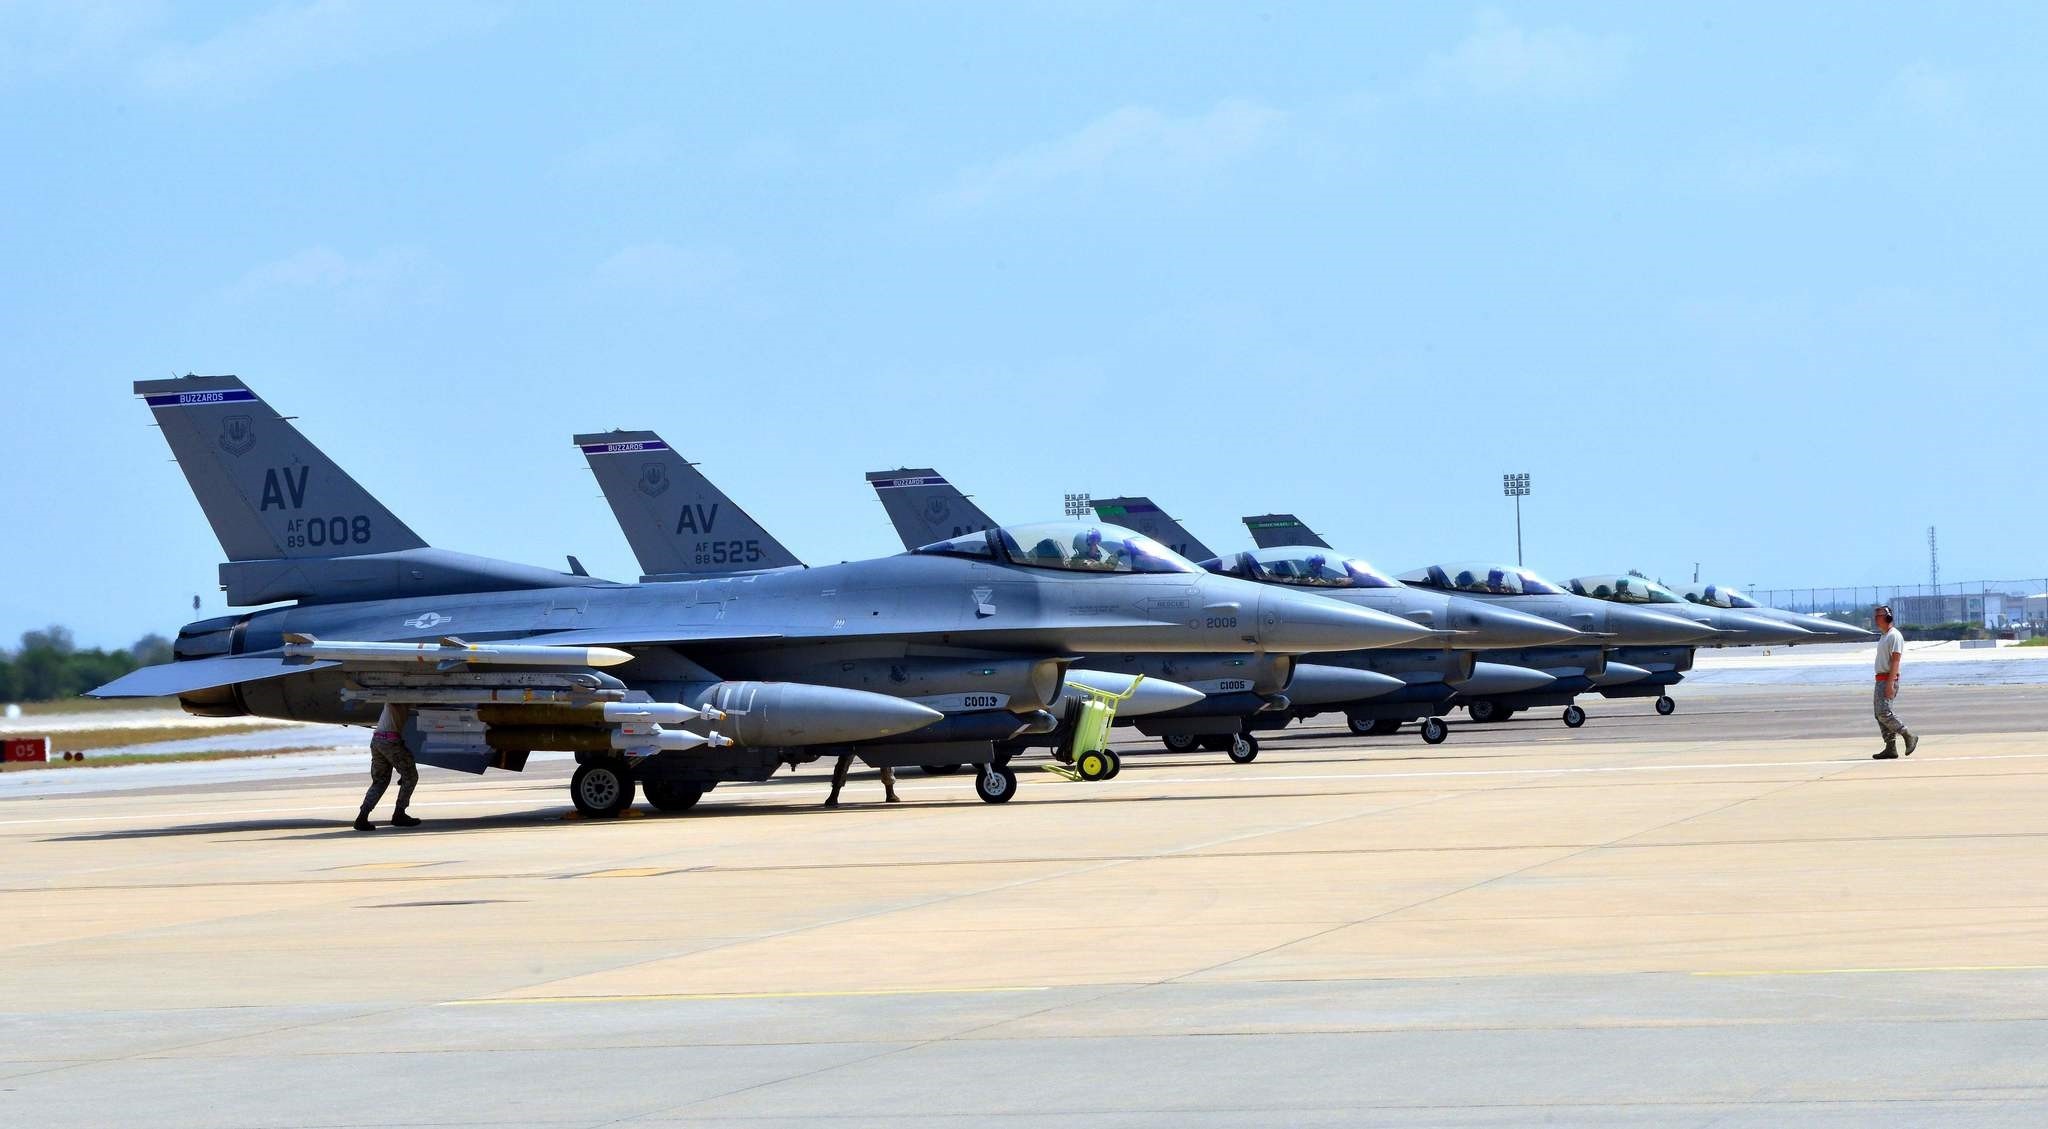 This US Air Force handout photo taken on Aug. 9, 2015 shows F-16 Fighting Falcons sitting on the tarmac at the Incirlik Air Base in Turkey.